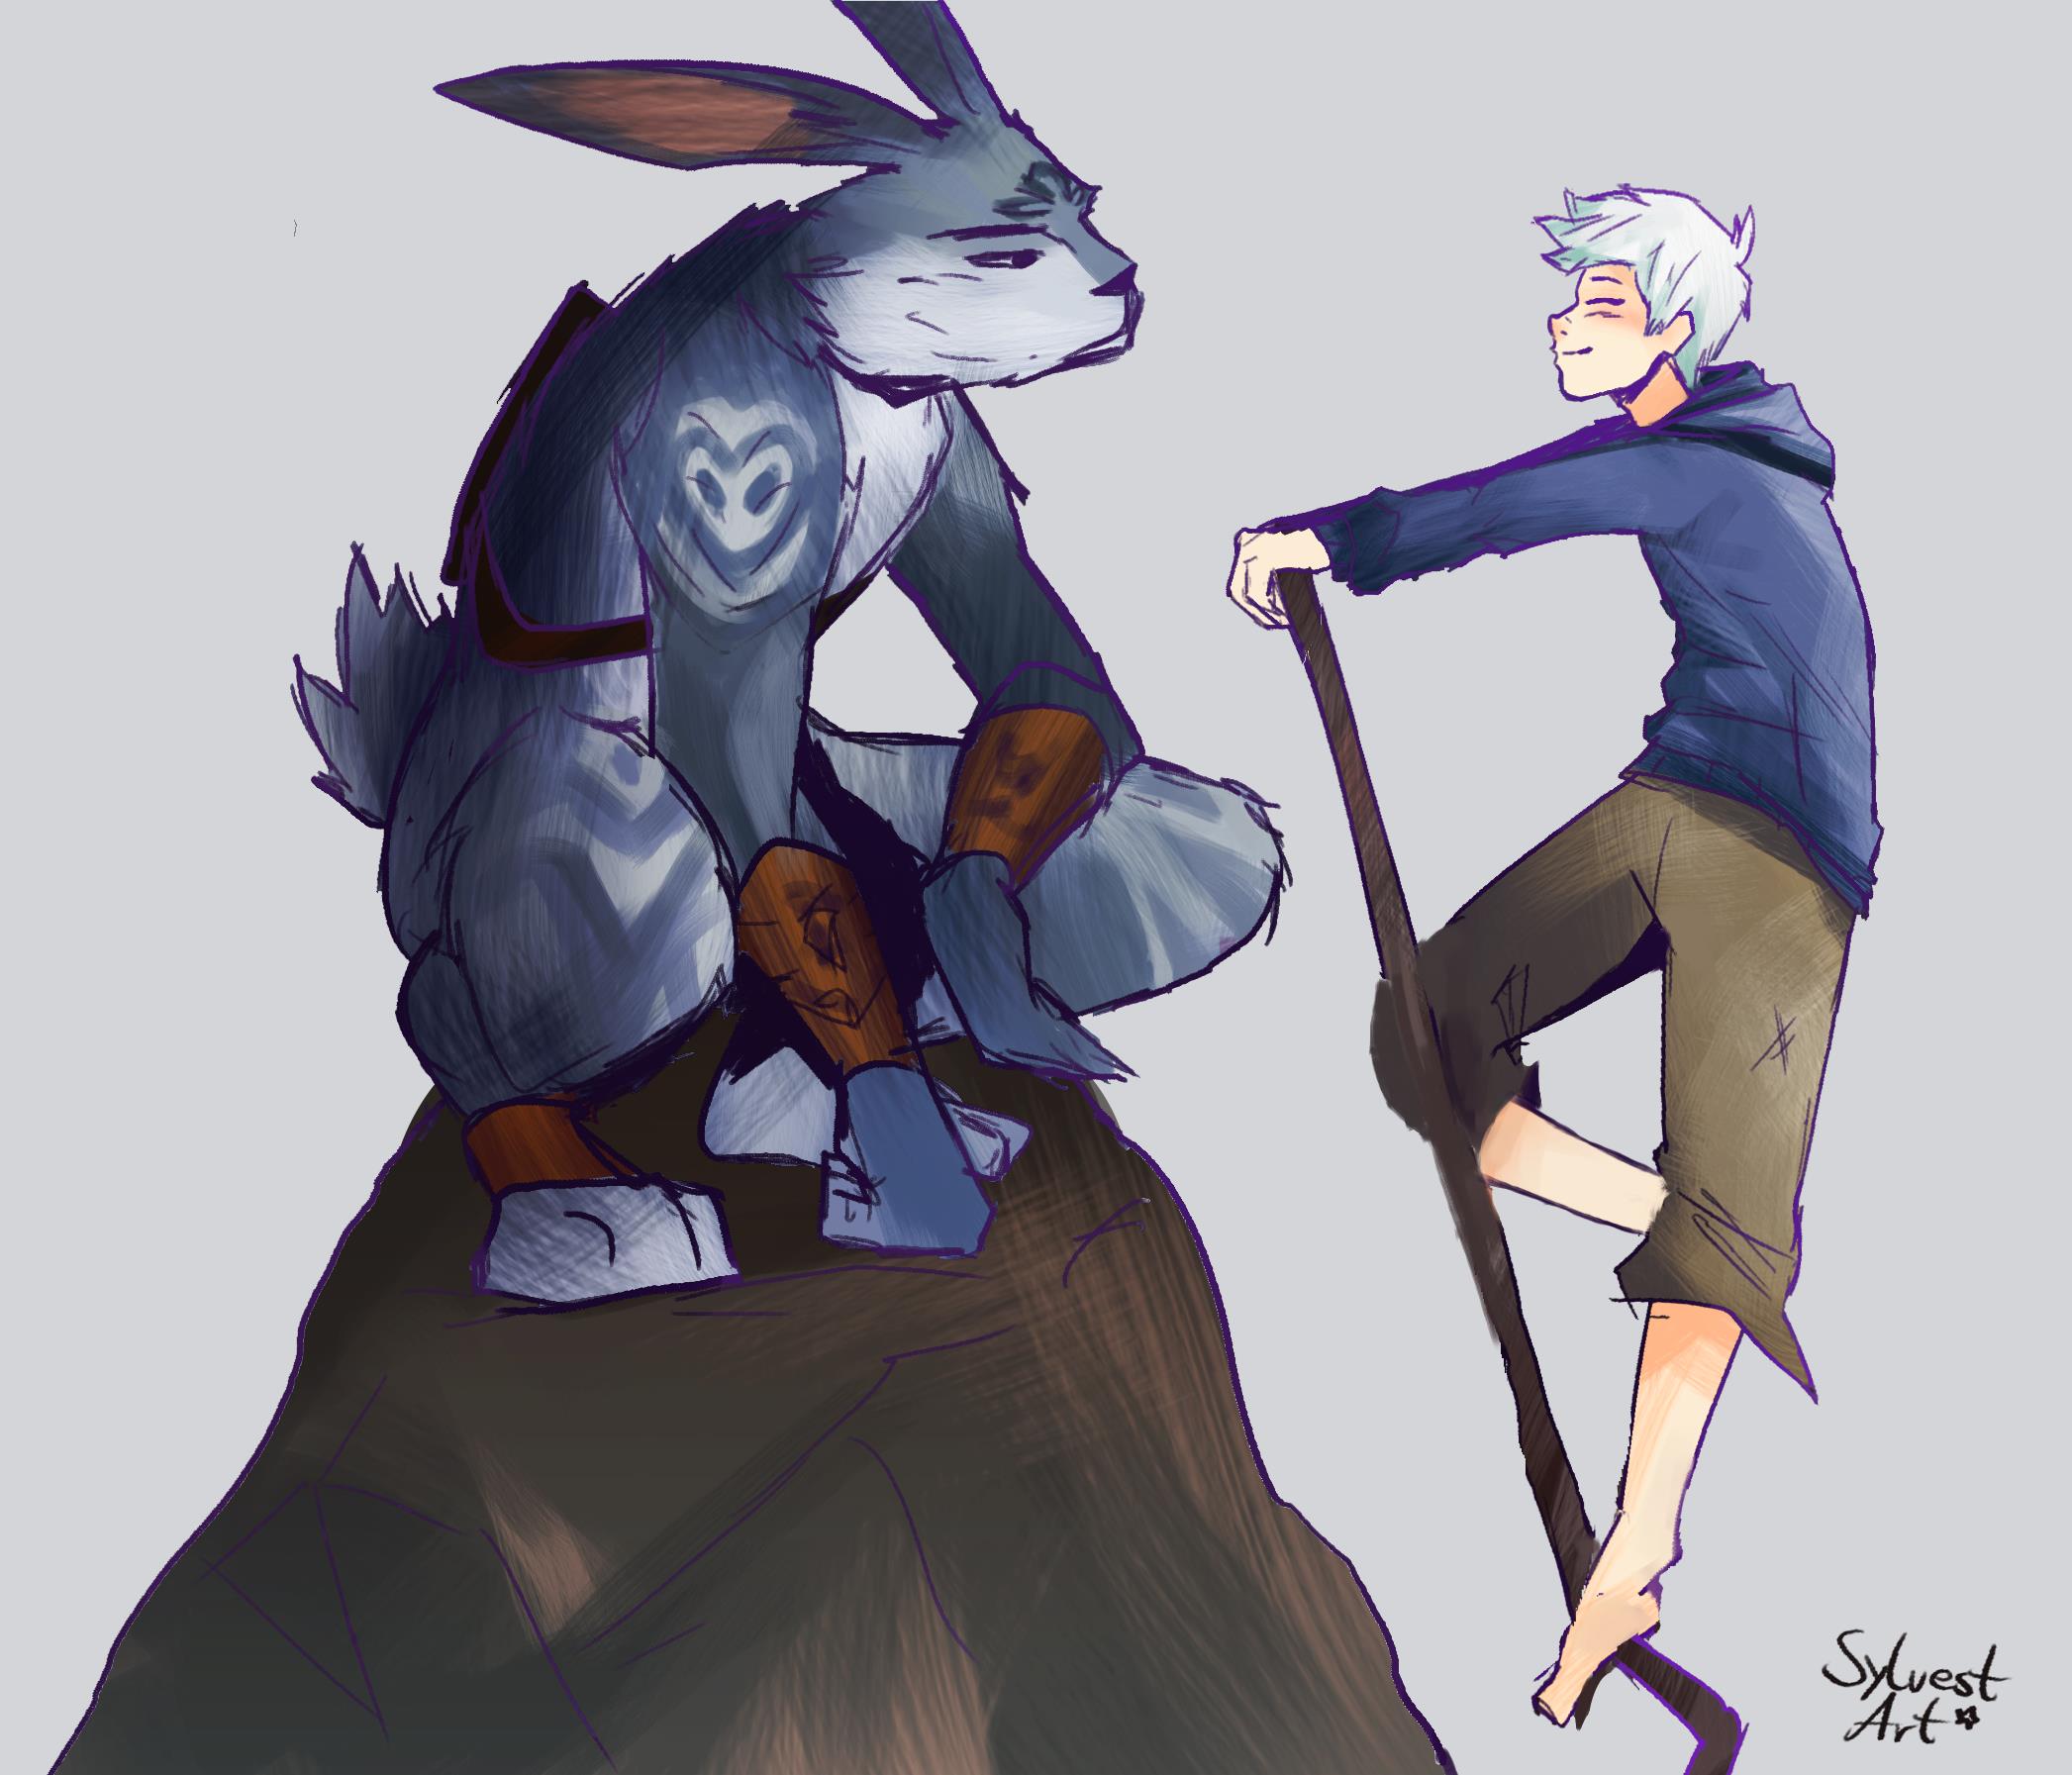 Jack Frost and the Easter Bunny